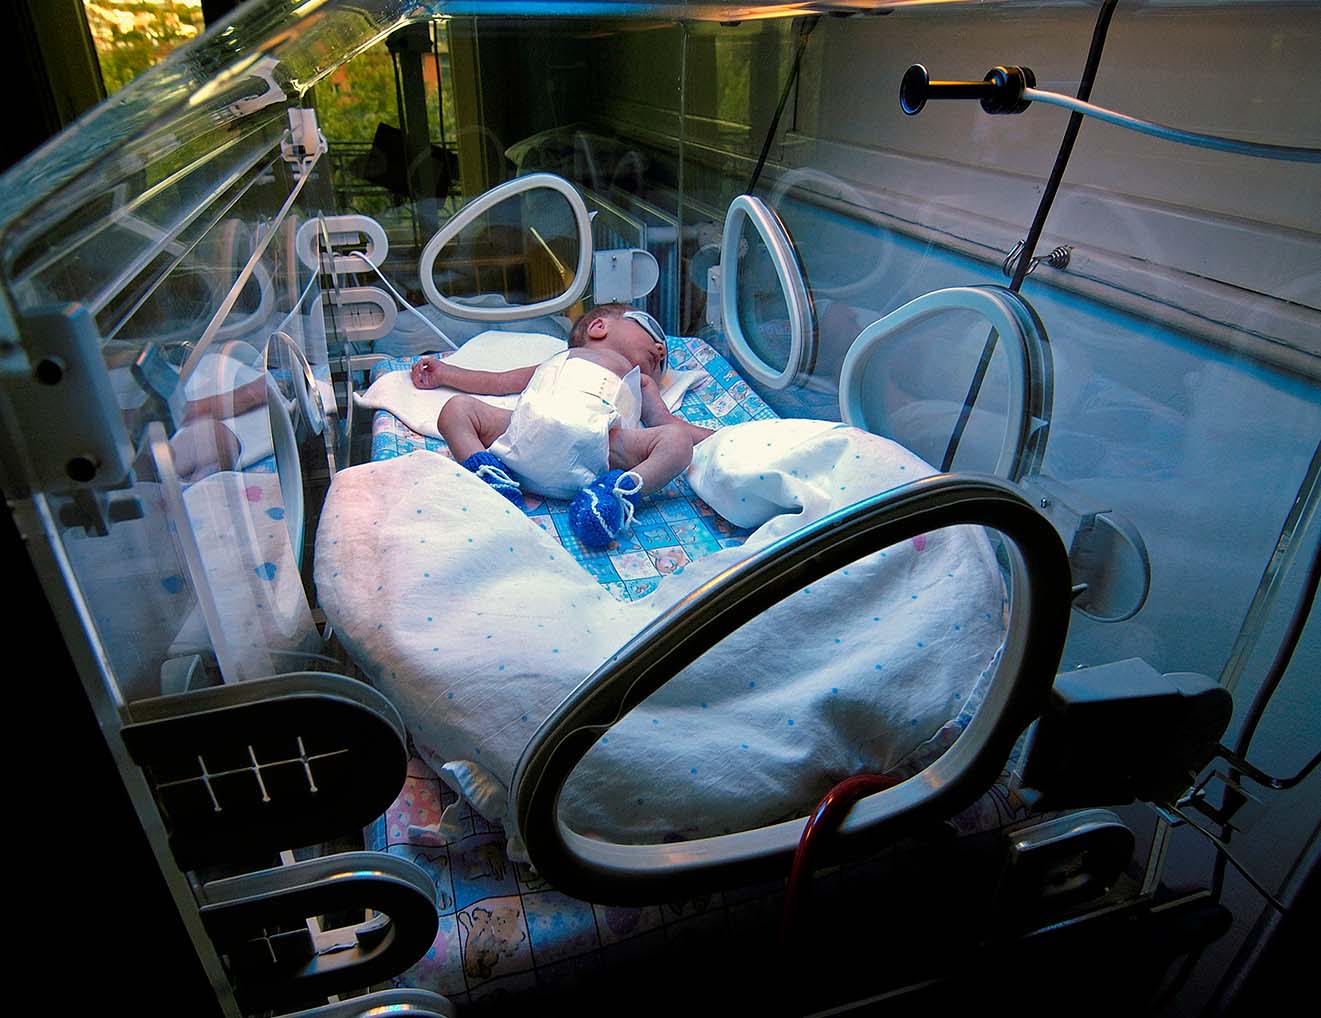 Neonatal and Delivery Unit Lighting Goes from Too Bright to Just Right